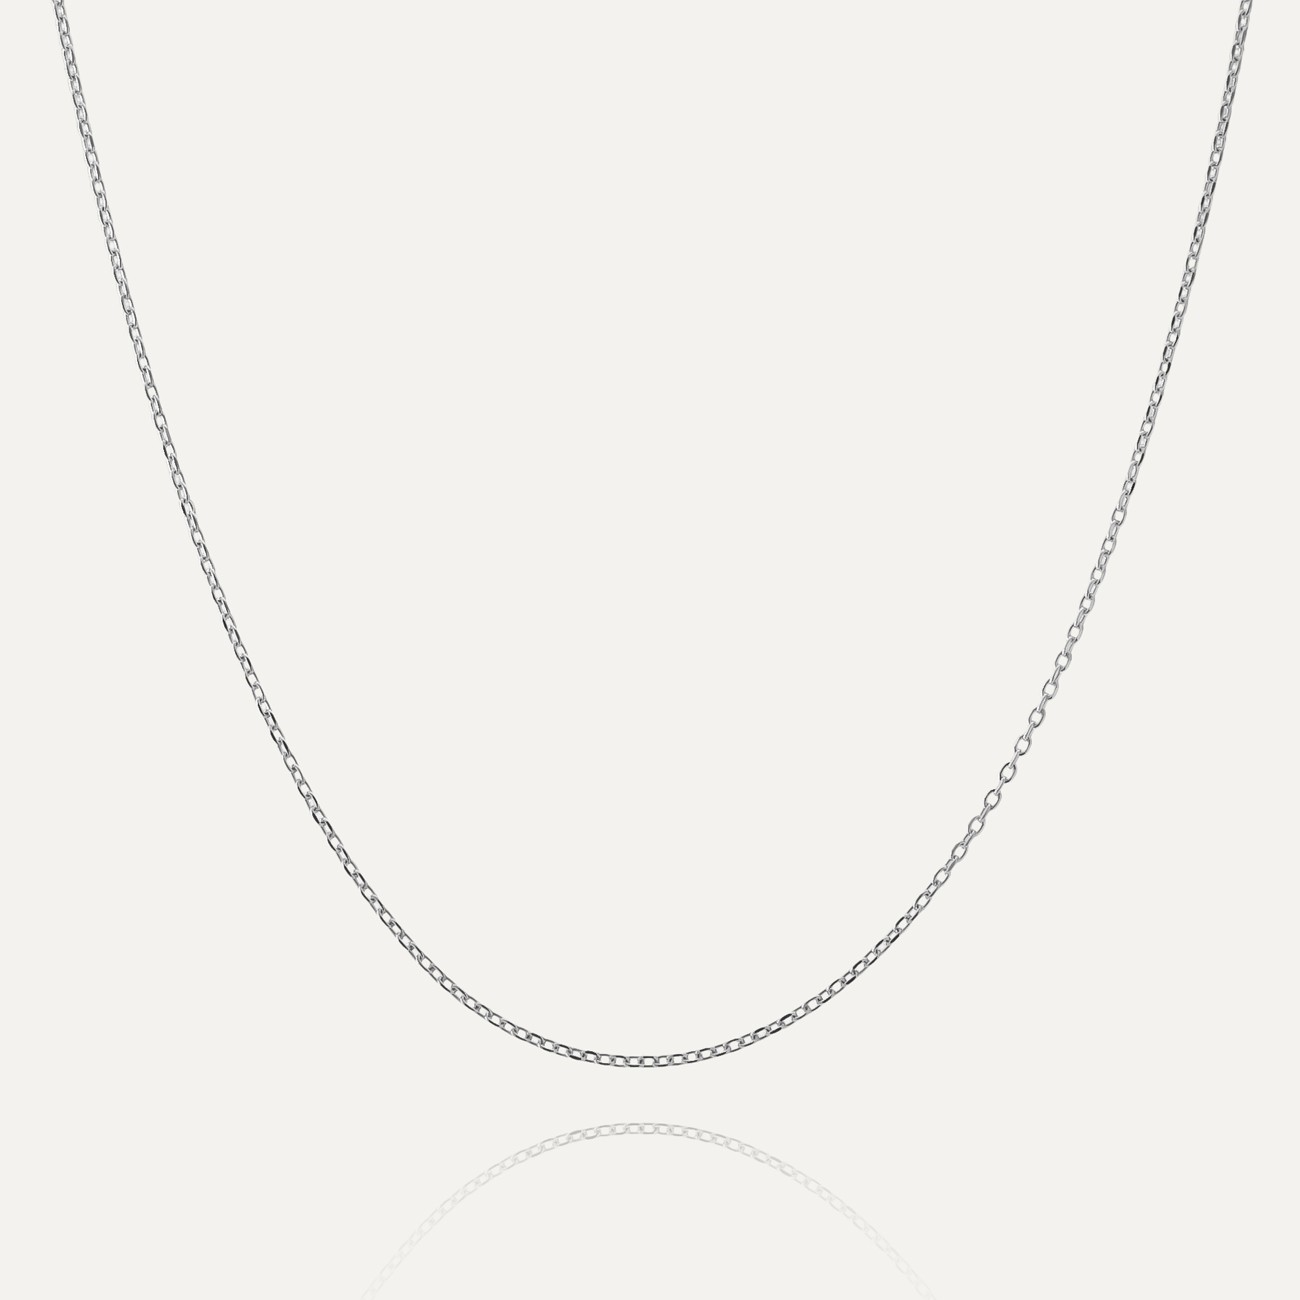 LIGHT SILVER NECKLACE 55 CM, RHODIUM PLATED